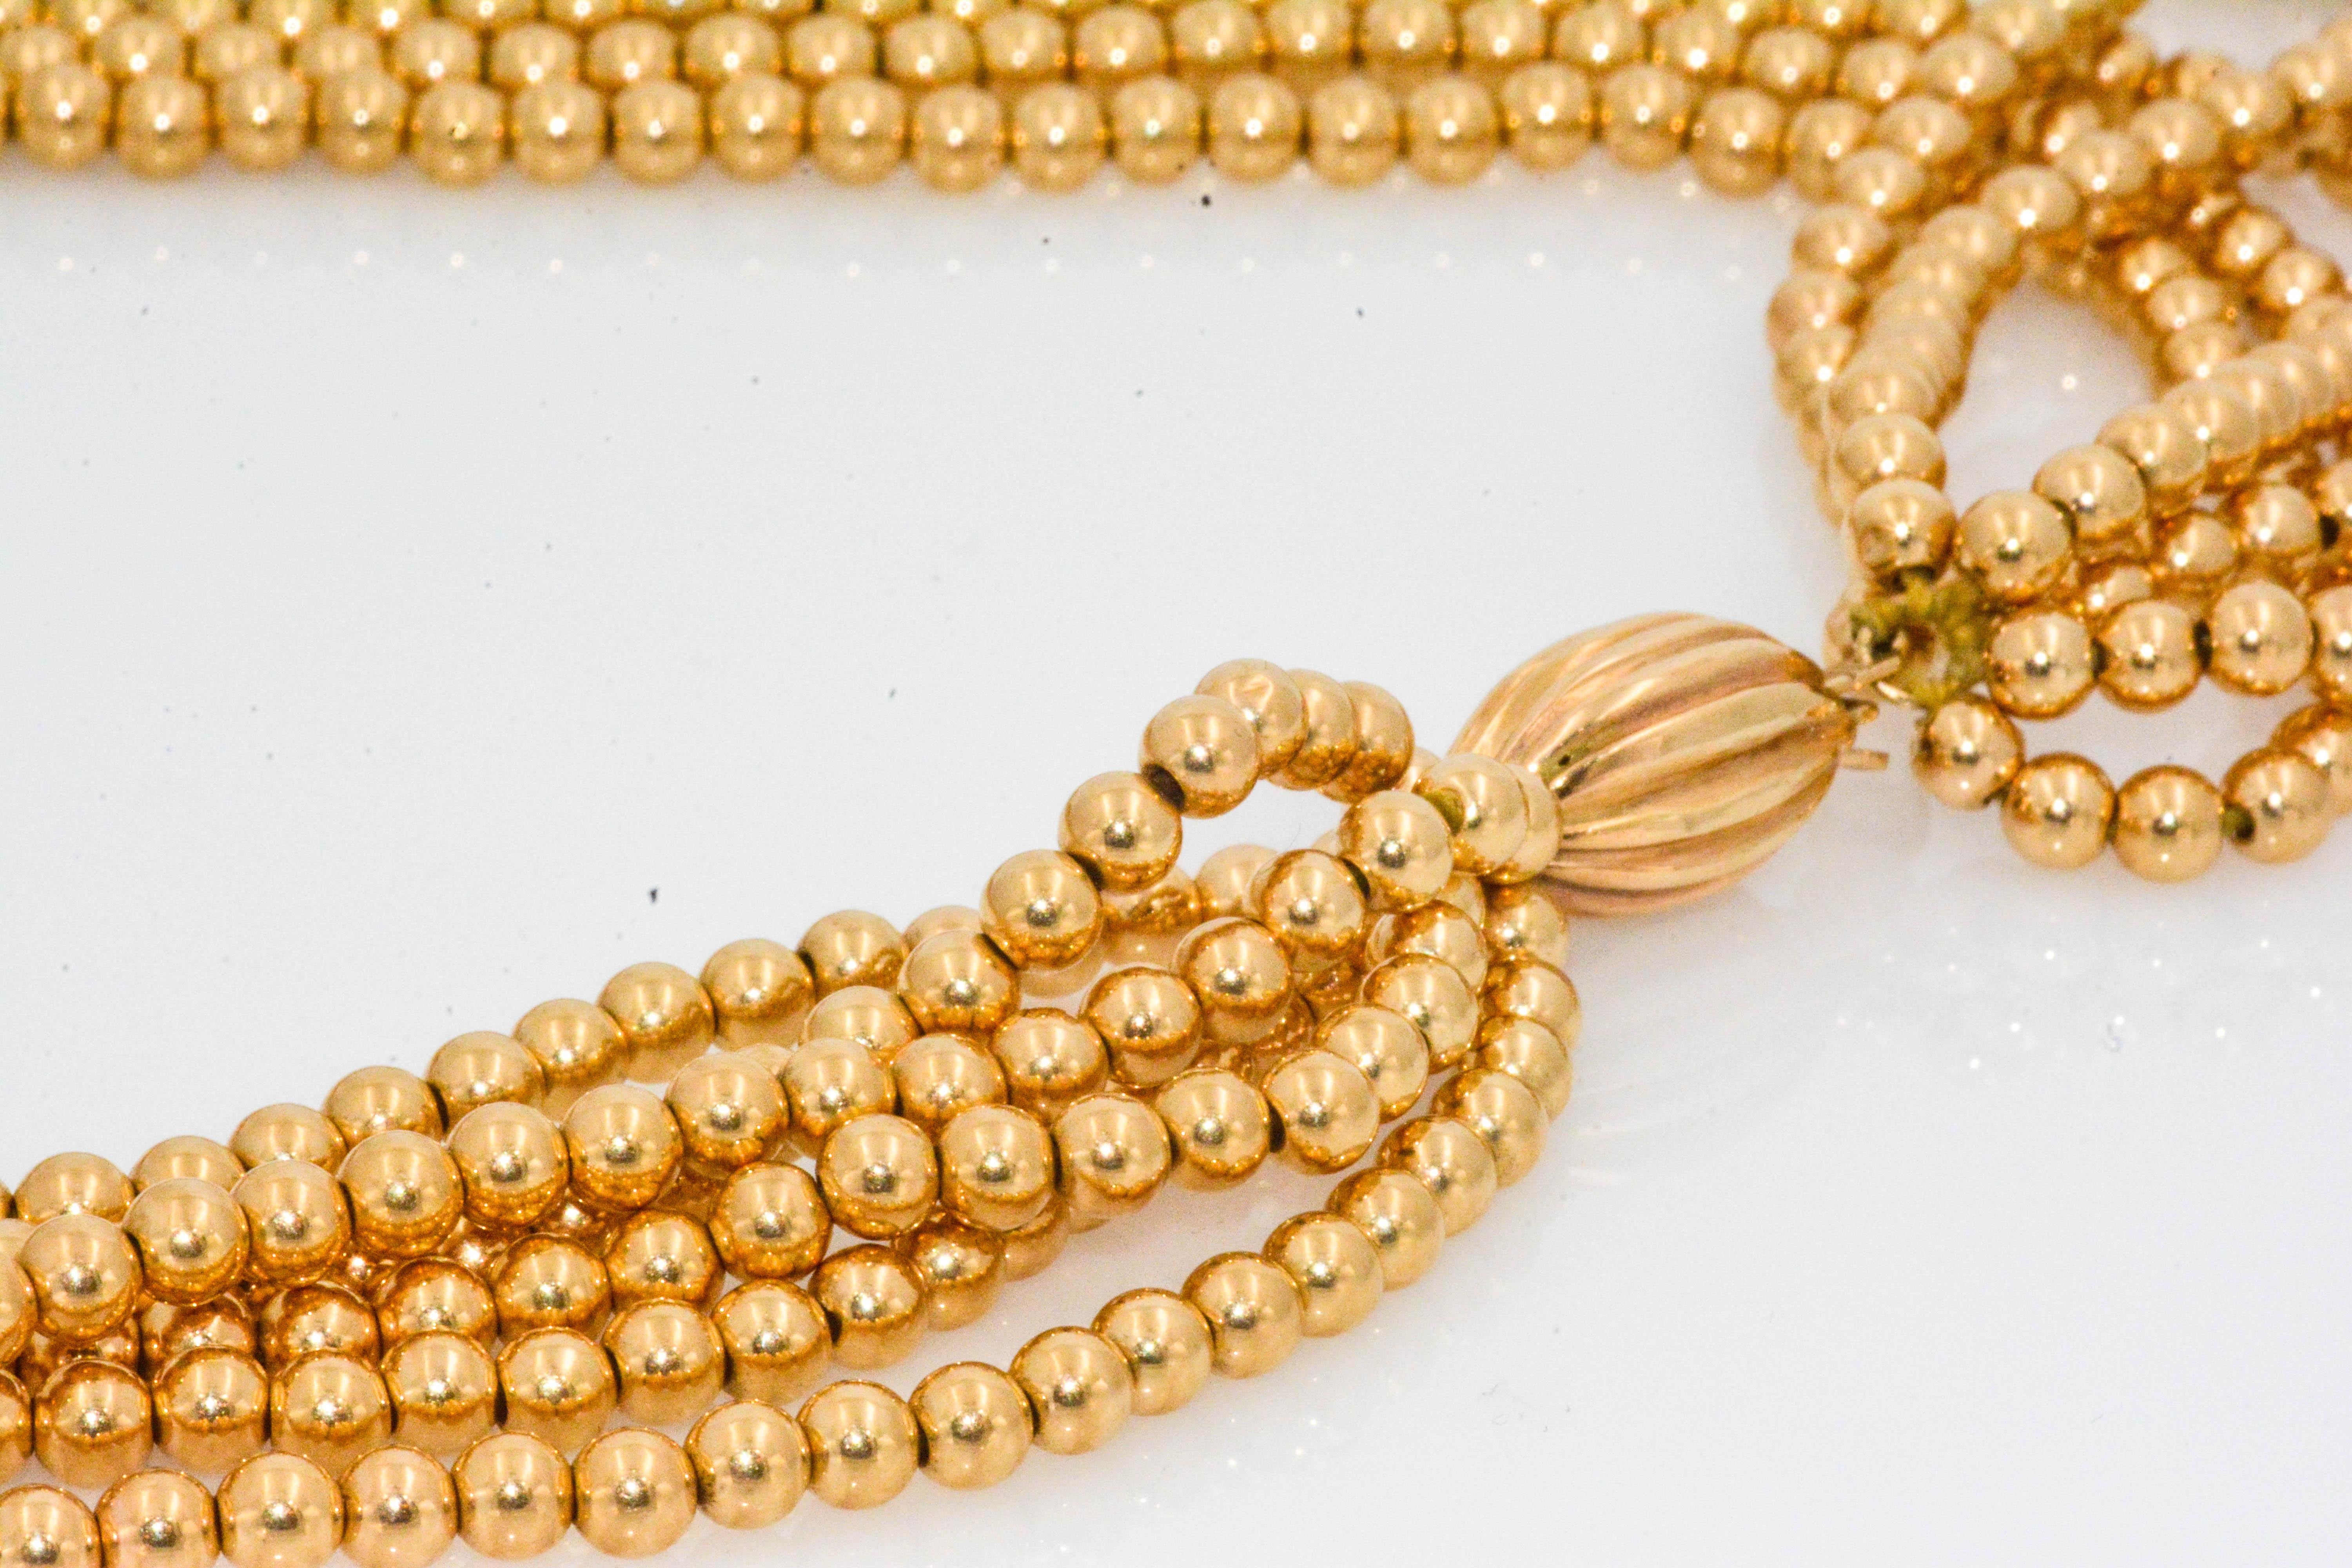 Presenting six strands of high polish 14 karat yellow gold beads in a 32 inch necklace. Feathery, light, and graceful.; this classic gold bead necklace is Circa 1980's.  Featuring an enchanting grooved 14 karat gold clasp.